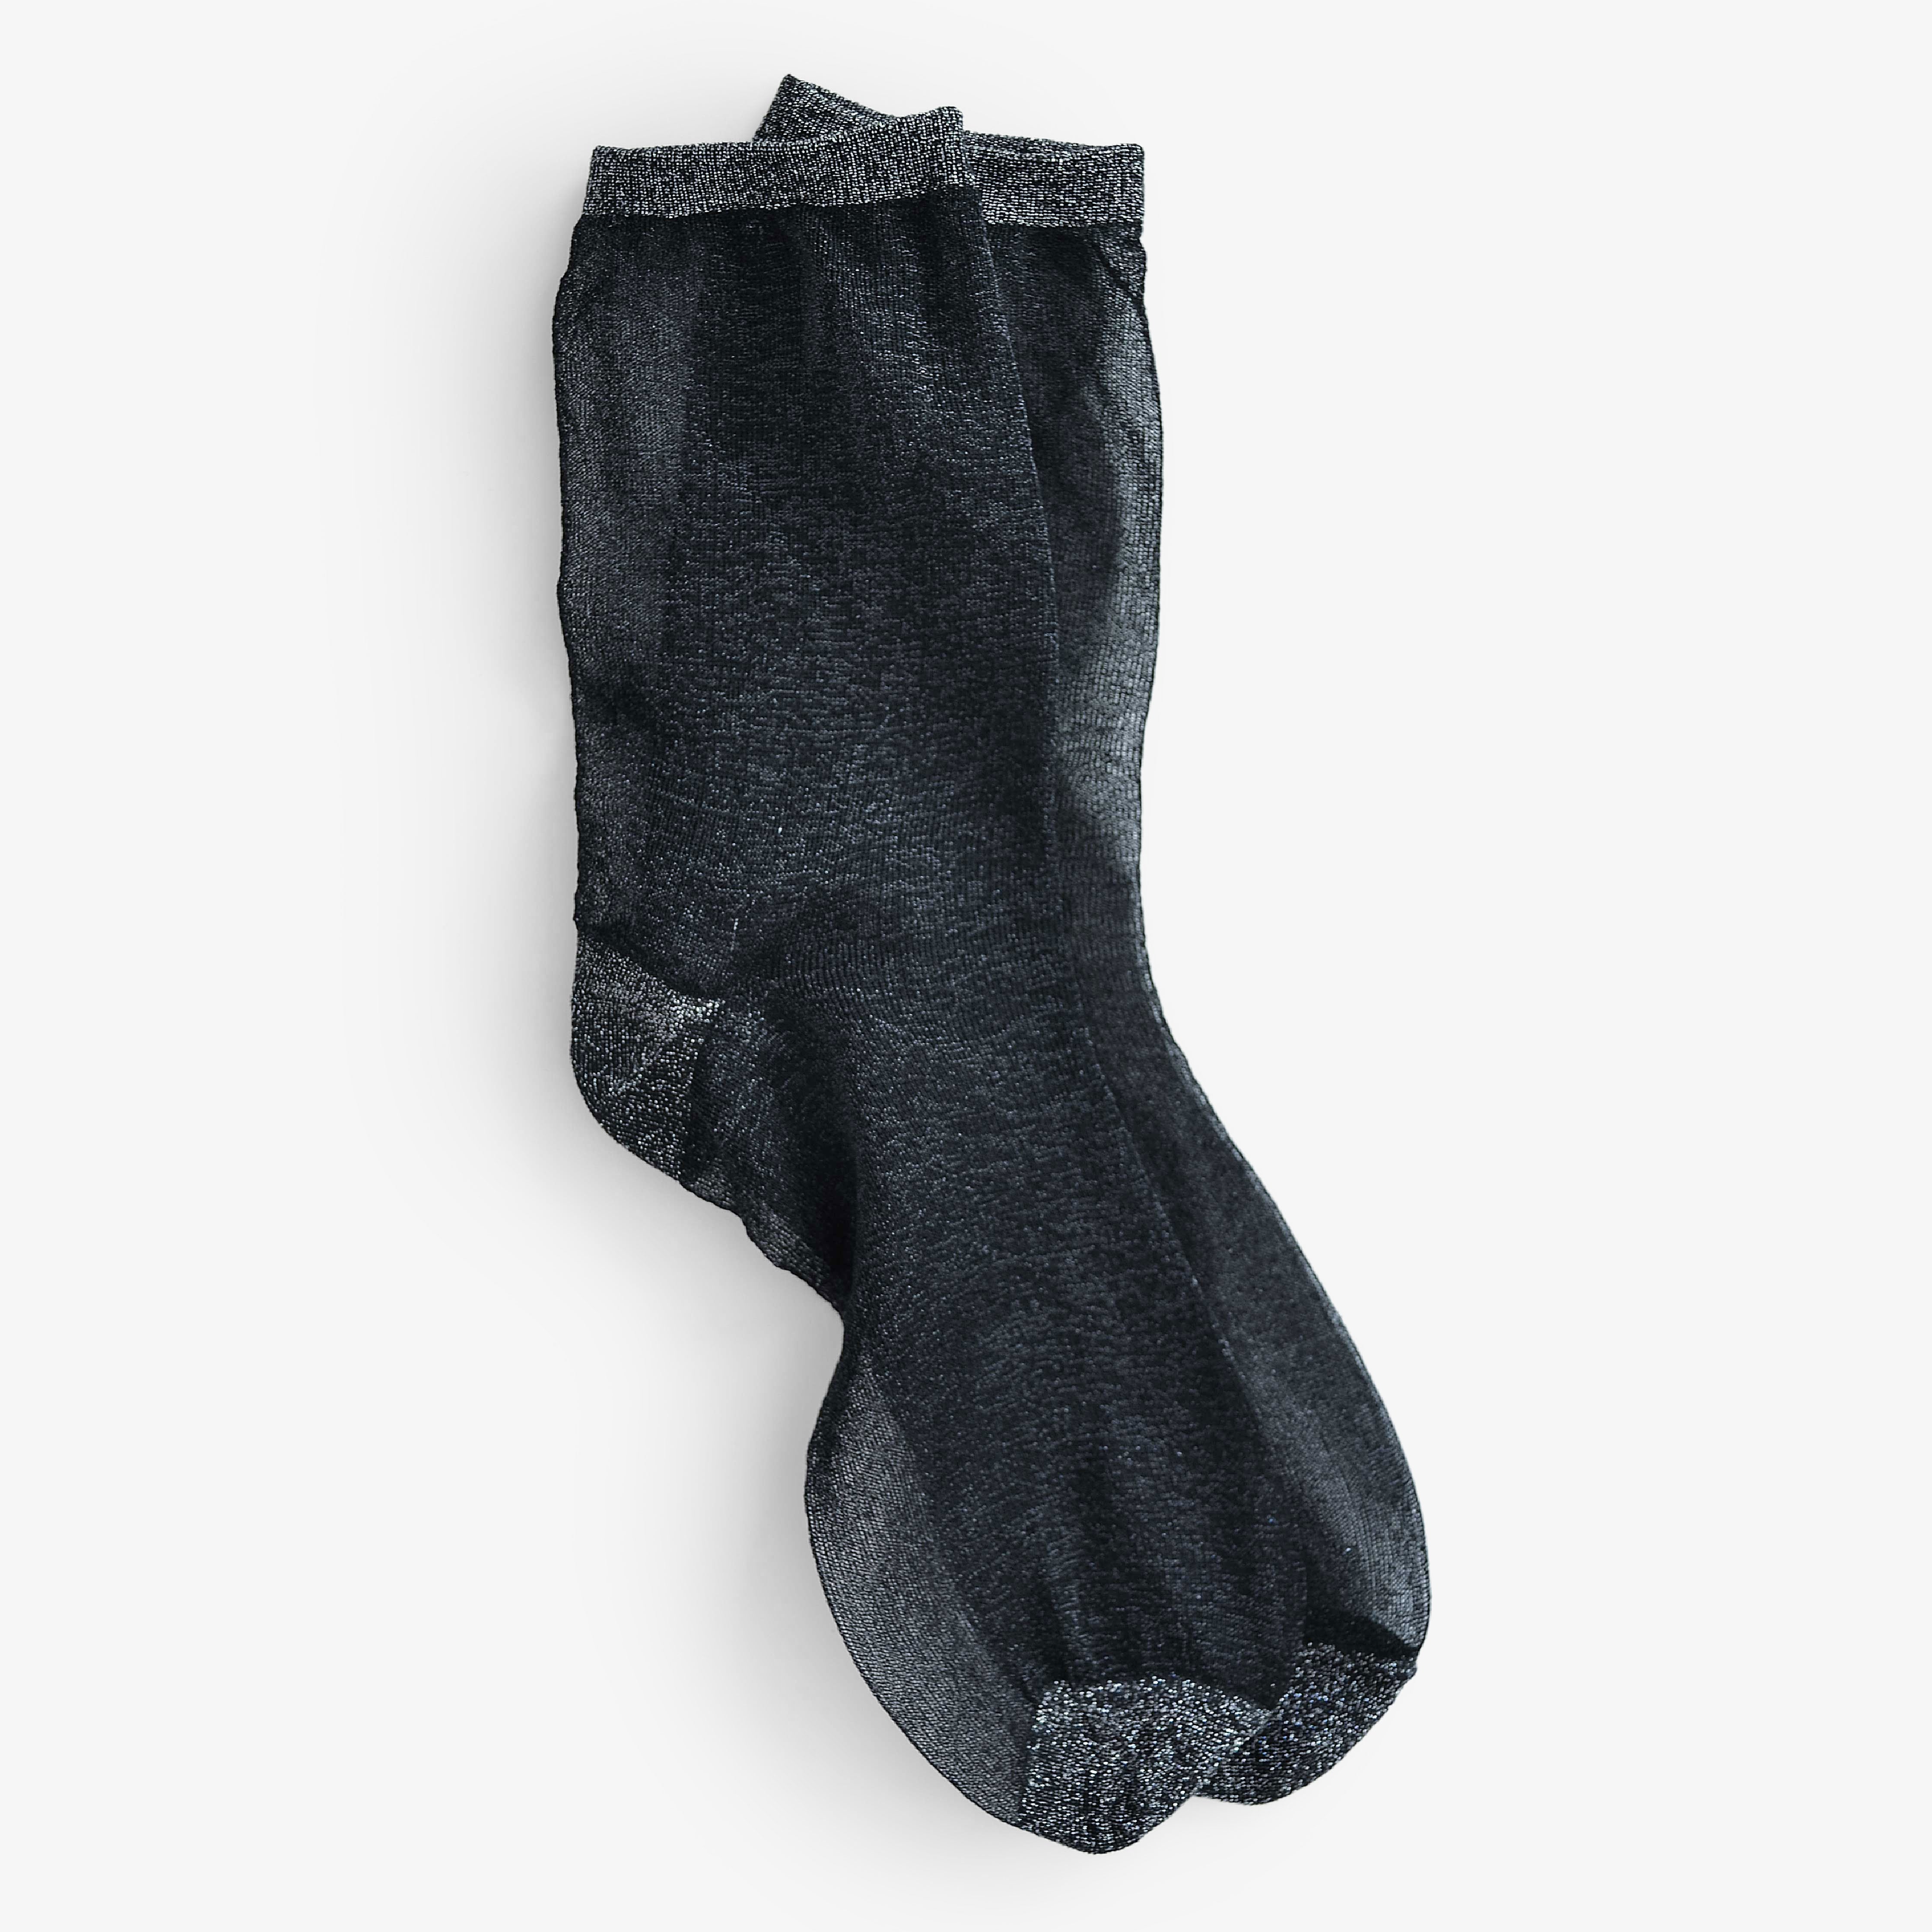 Elevate your style with Broadway socks in Black, Silver, Brick, or Blue. Short crew length with subtle metallic thread. Made in South Korea.